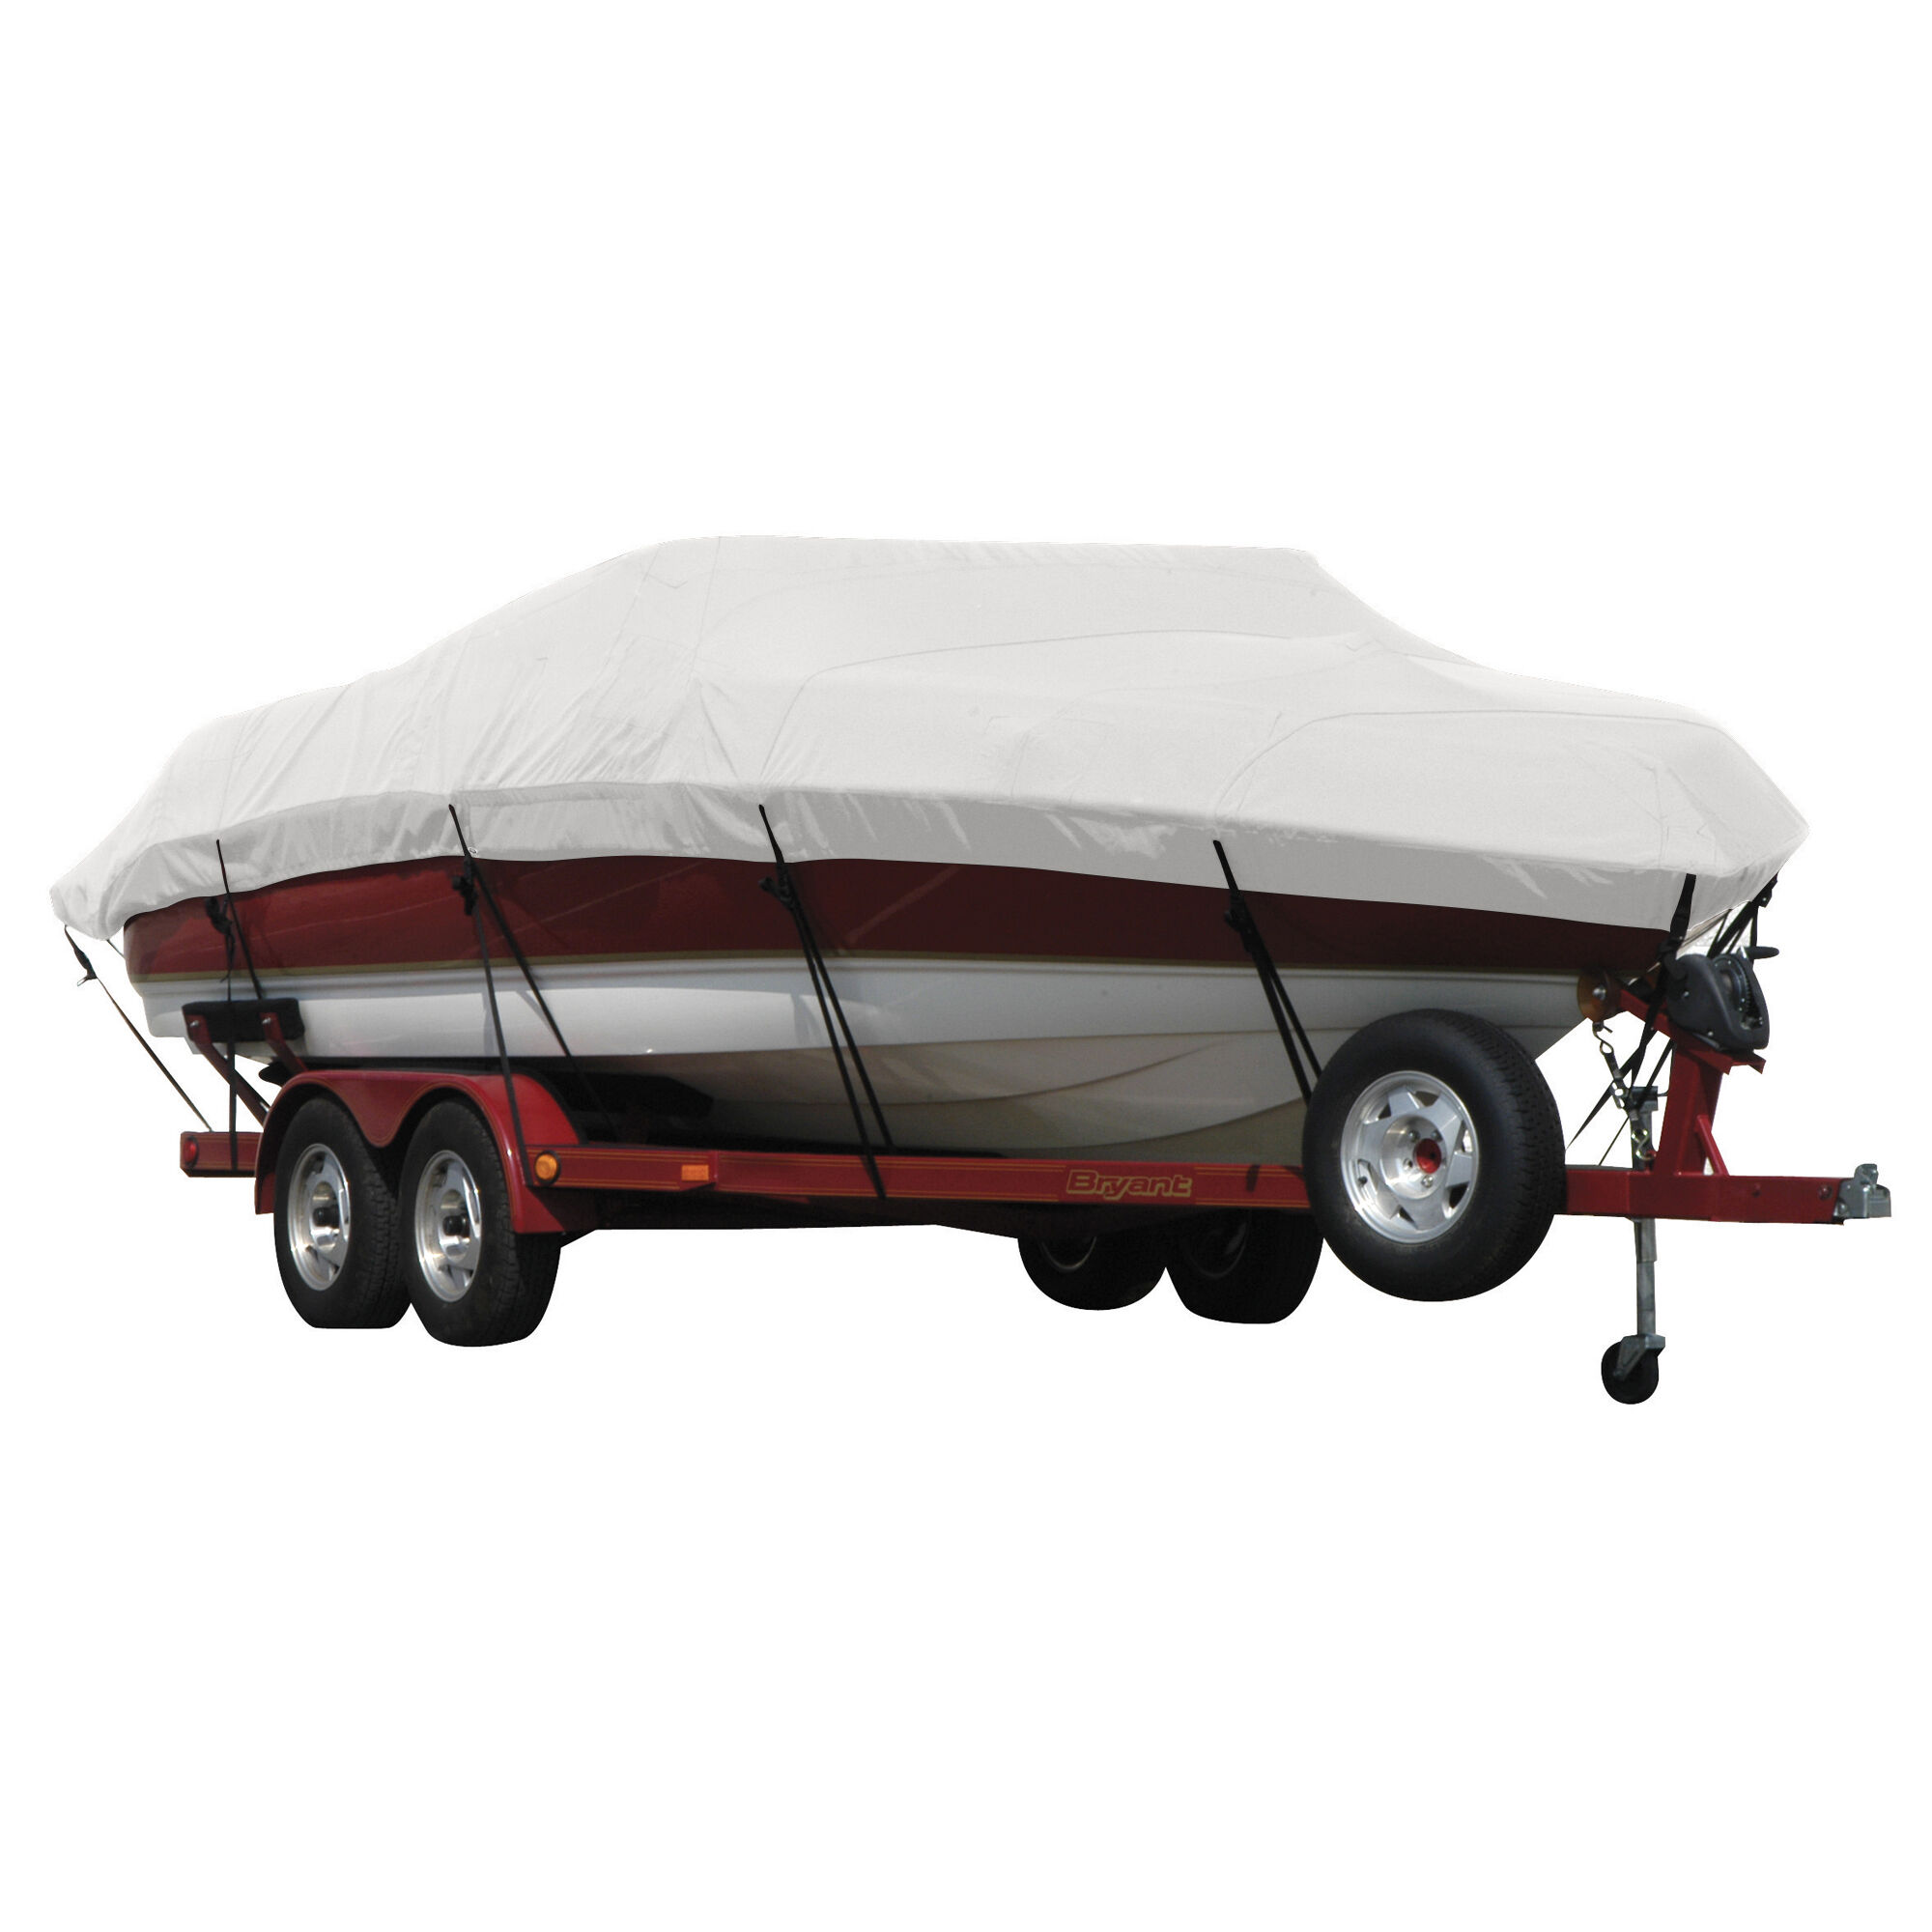 Covermate Exact Fit Sunbrella Boat Cover for Campion Chase 910 Zri Chase 910 Zri Cc I/O. Natural in Natural Tan Acrylic